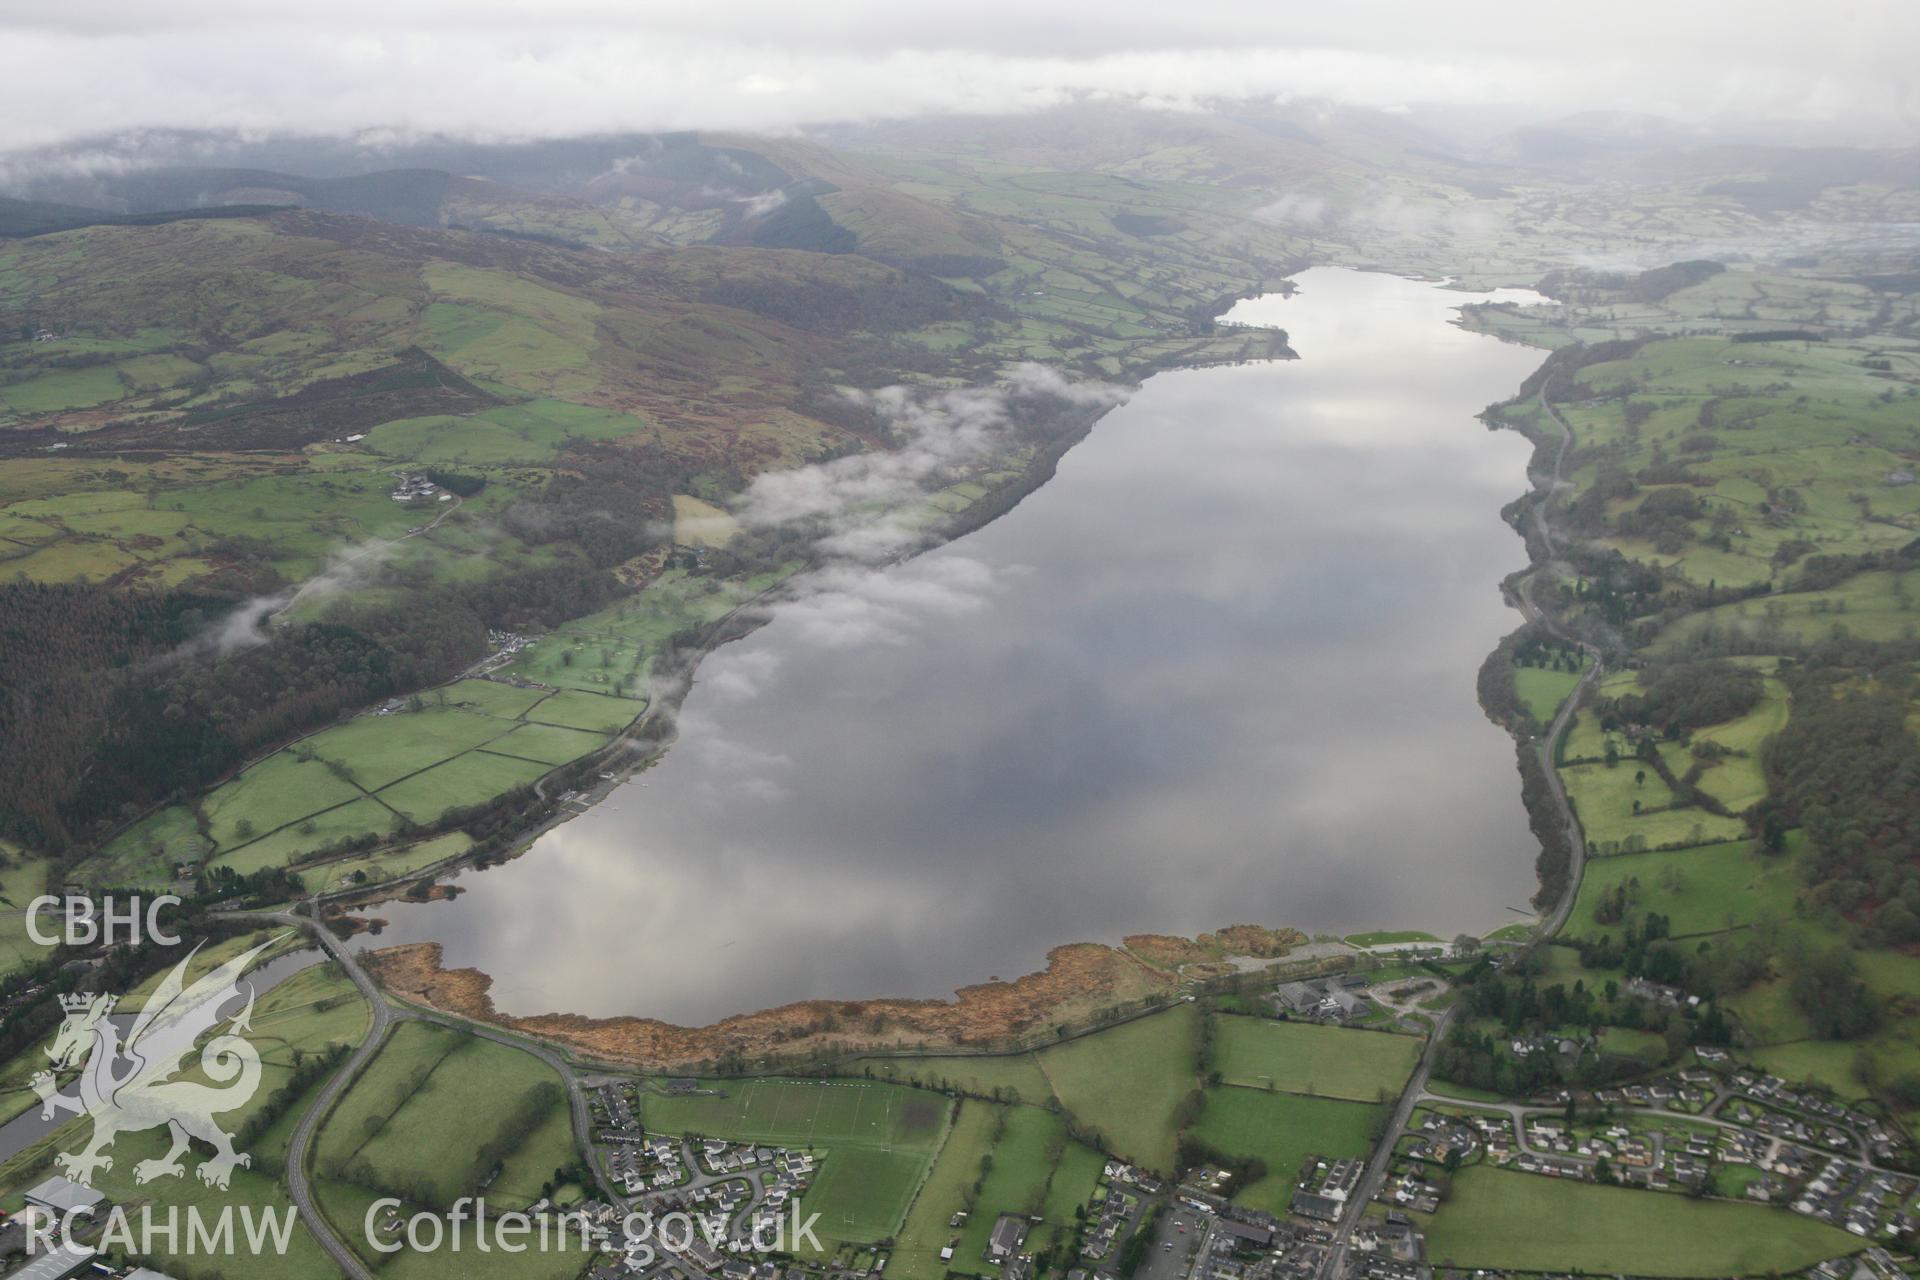 RCAHMW colour oblique photograph of Llyn Tegid, Bala Lake, view from north-east over Bala. Taken by Toby Driver on 13/01/2012.